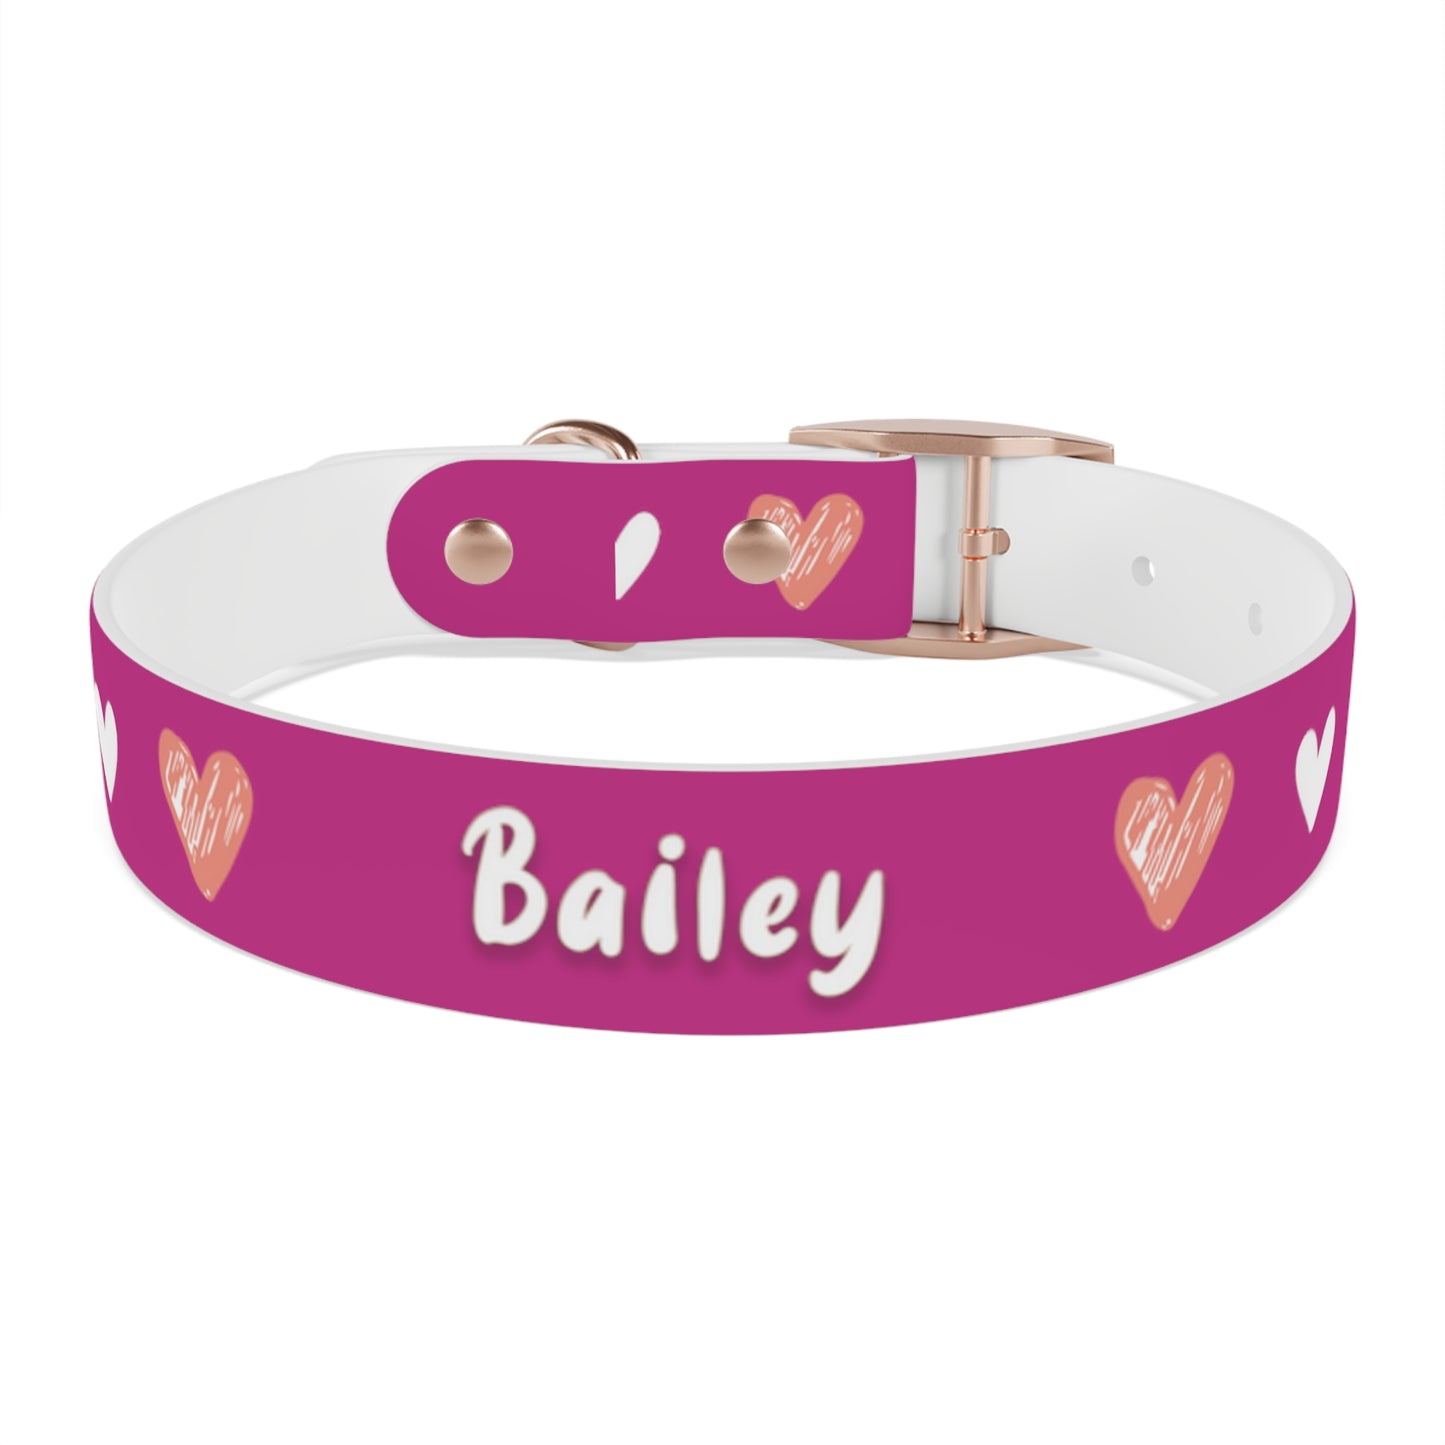 a dog collar with a beautiful hearts pattern design and the dog's name in the middle of the collar. The color of the dog collar is pink